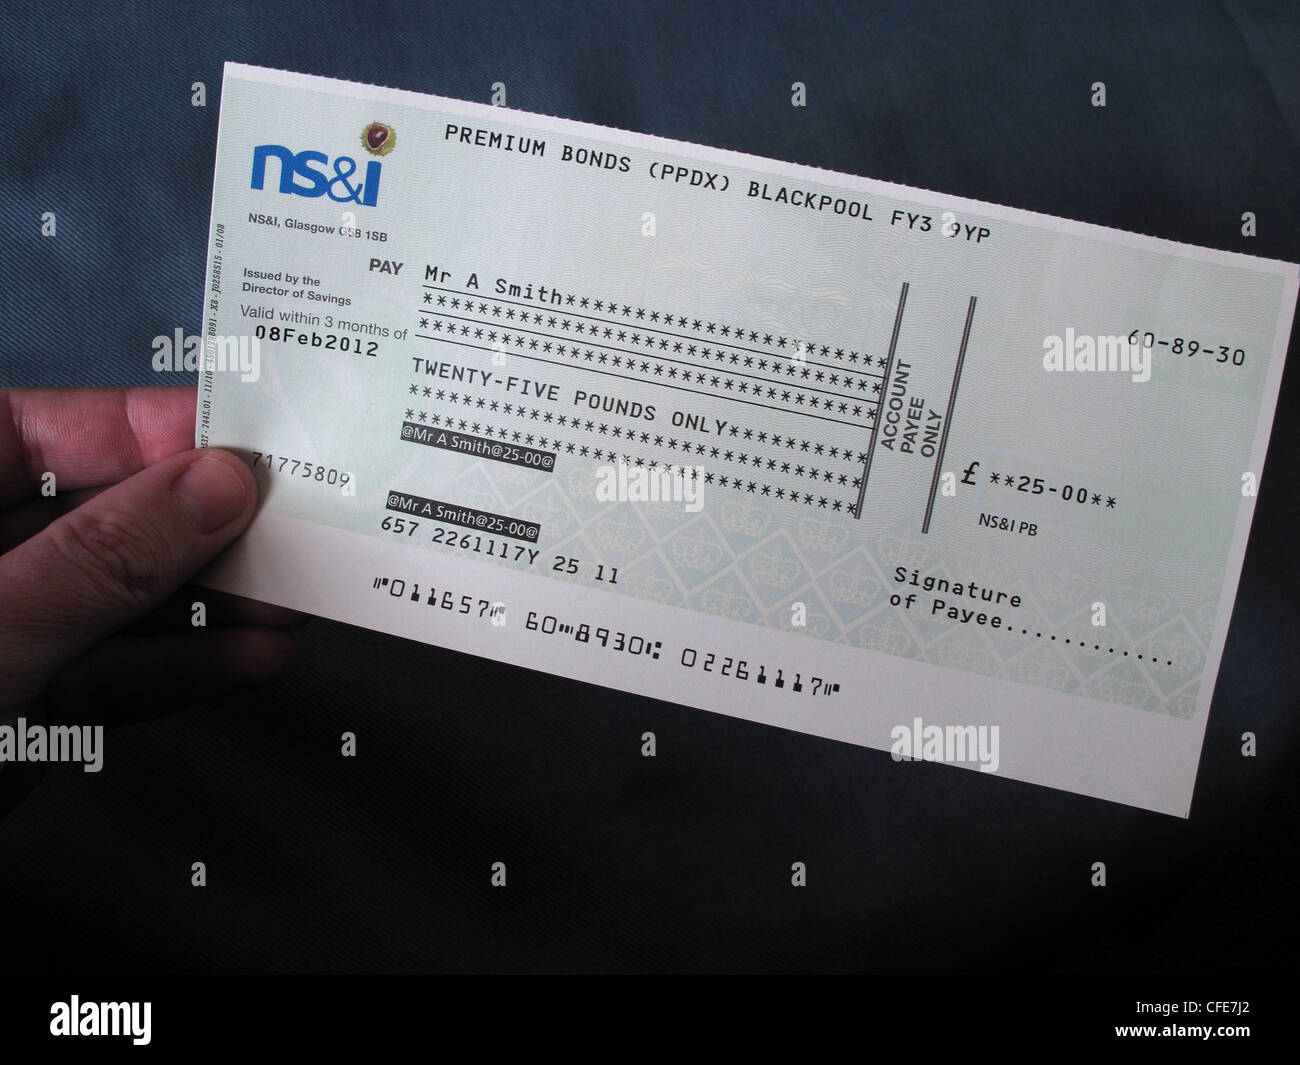 NS&I premium bond cheque held in a hand of the lucky winner Stock Photo